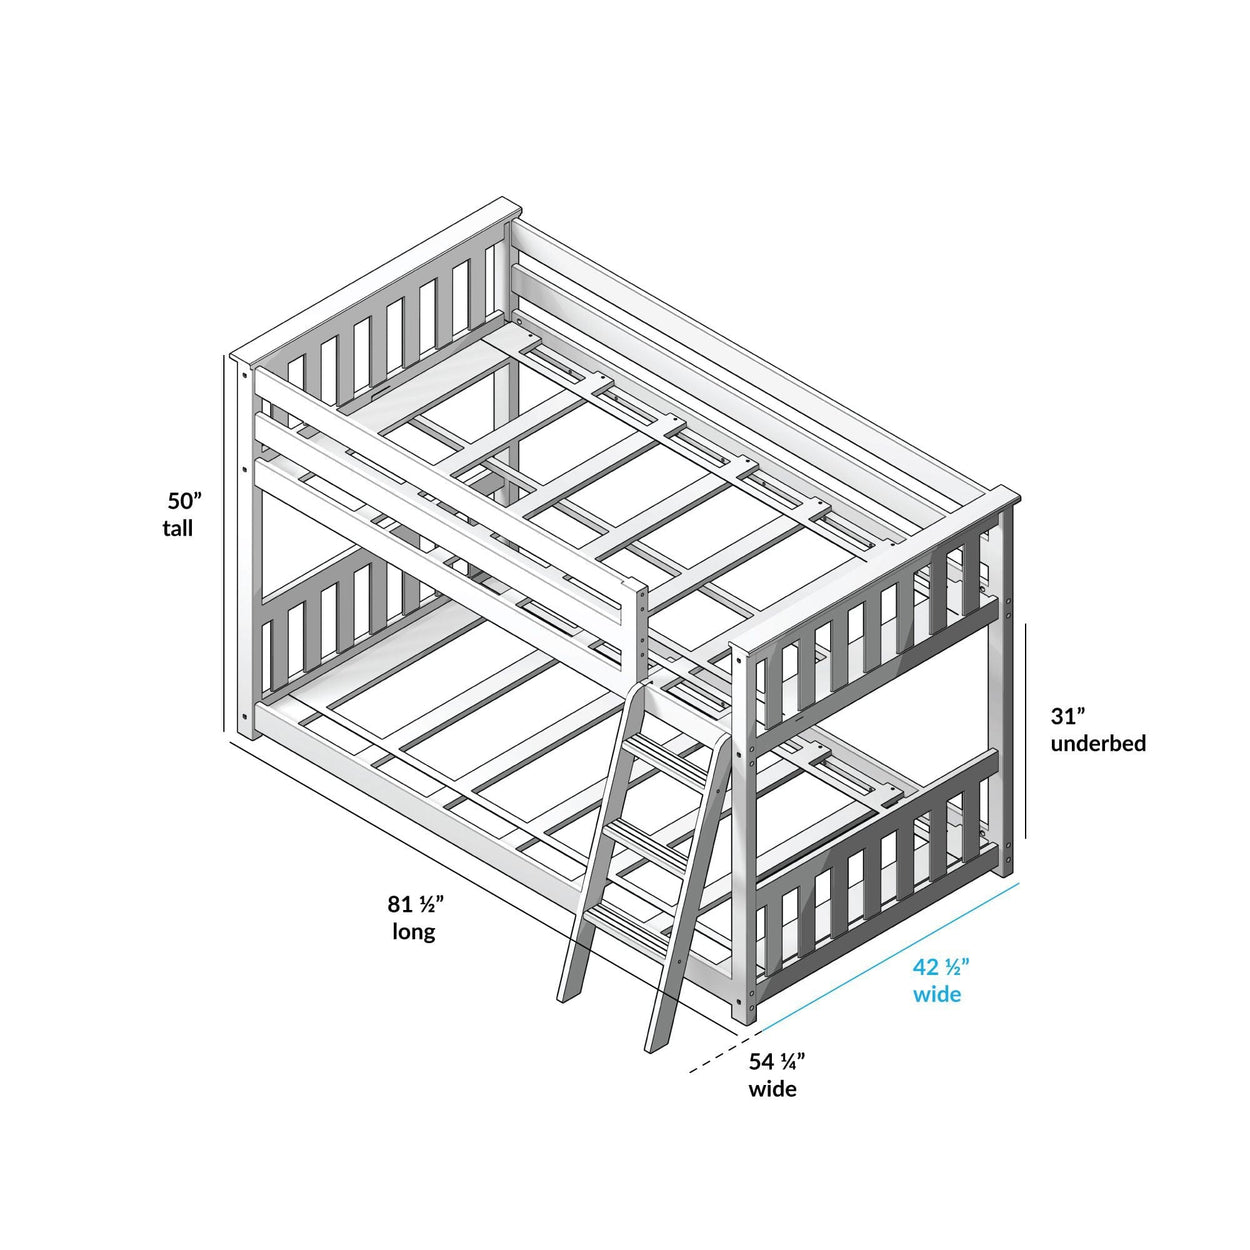 180214001209 : Bunk Beds Twin over Twin Low Bunk with Two Guard Rails, Natural